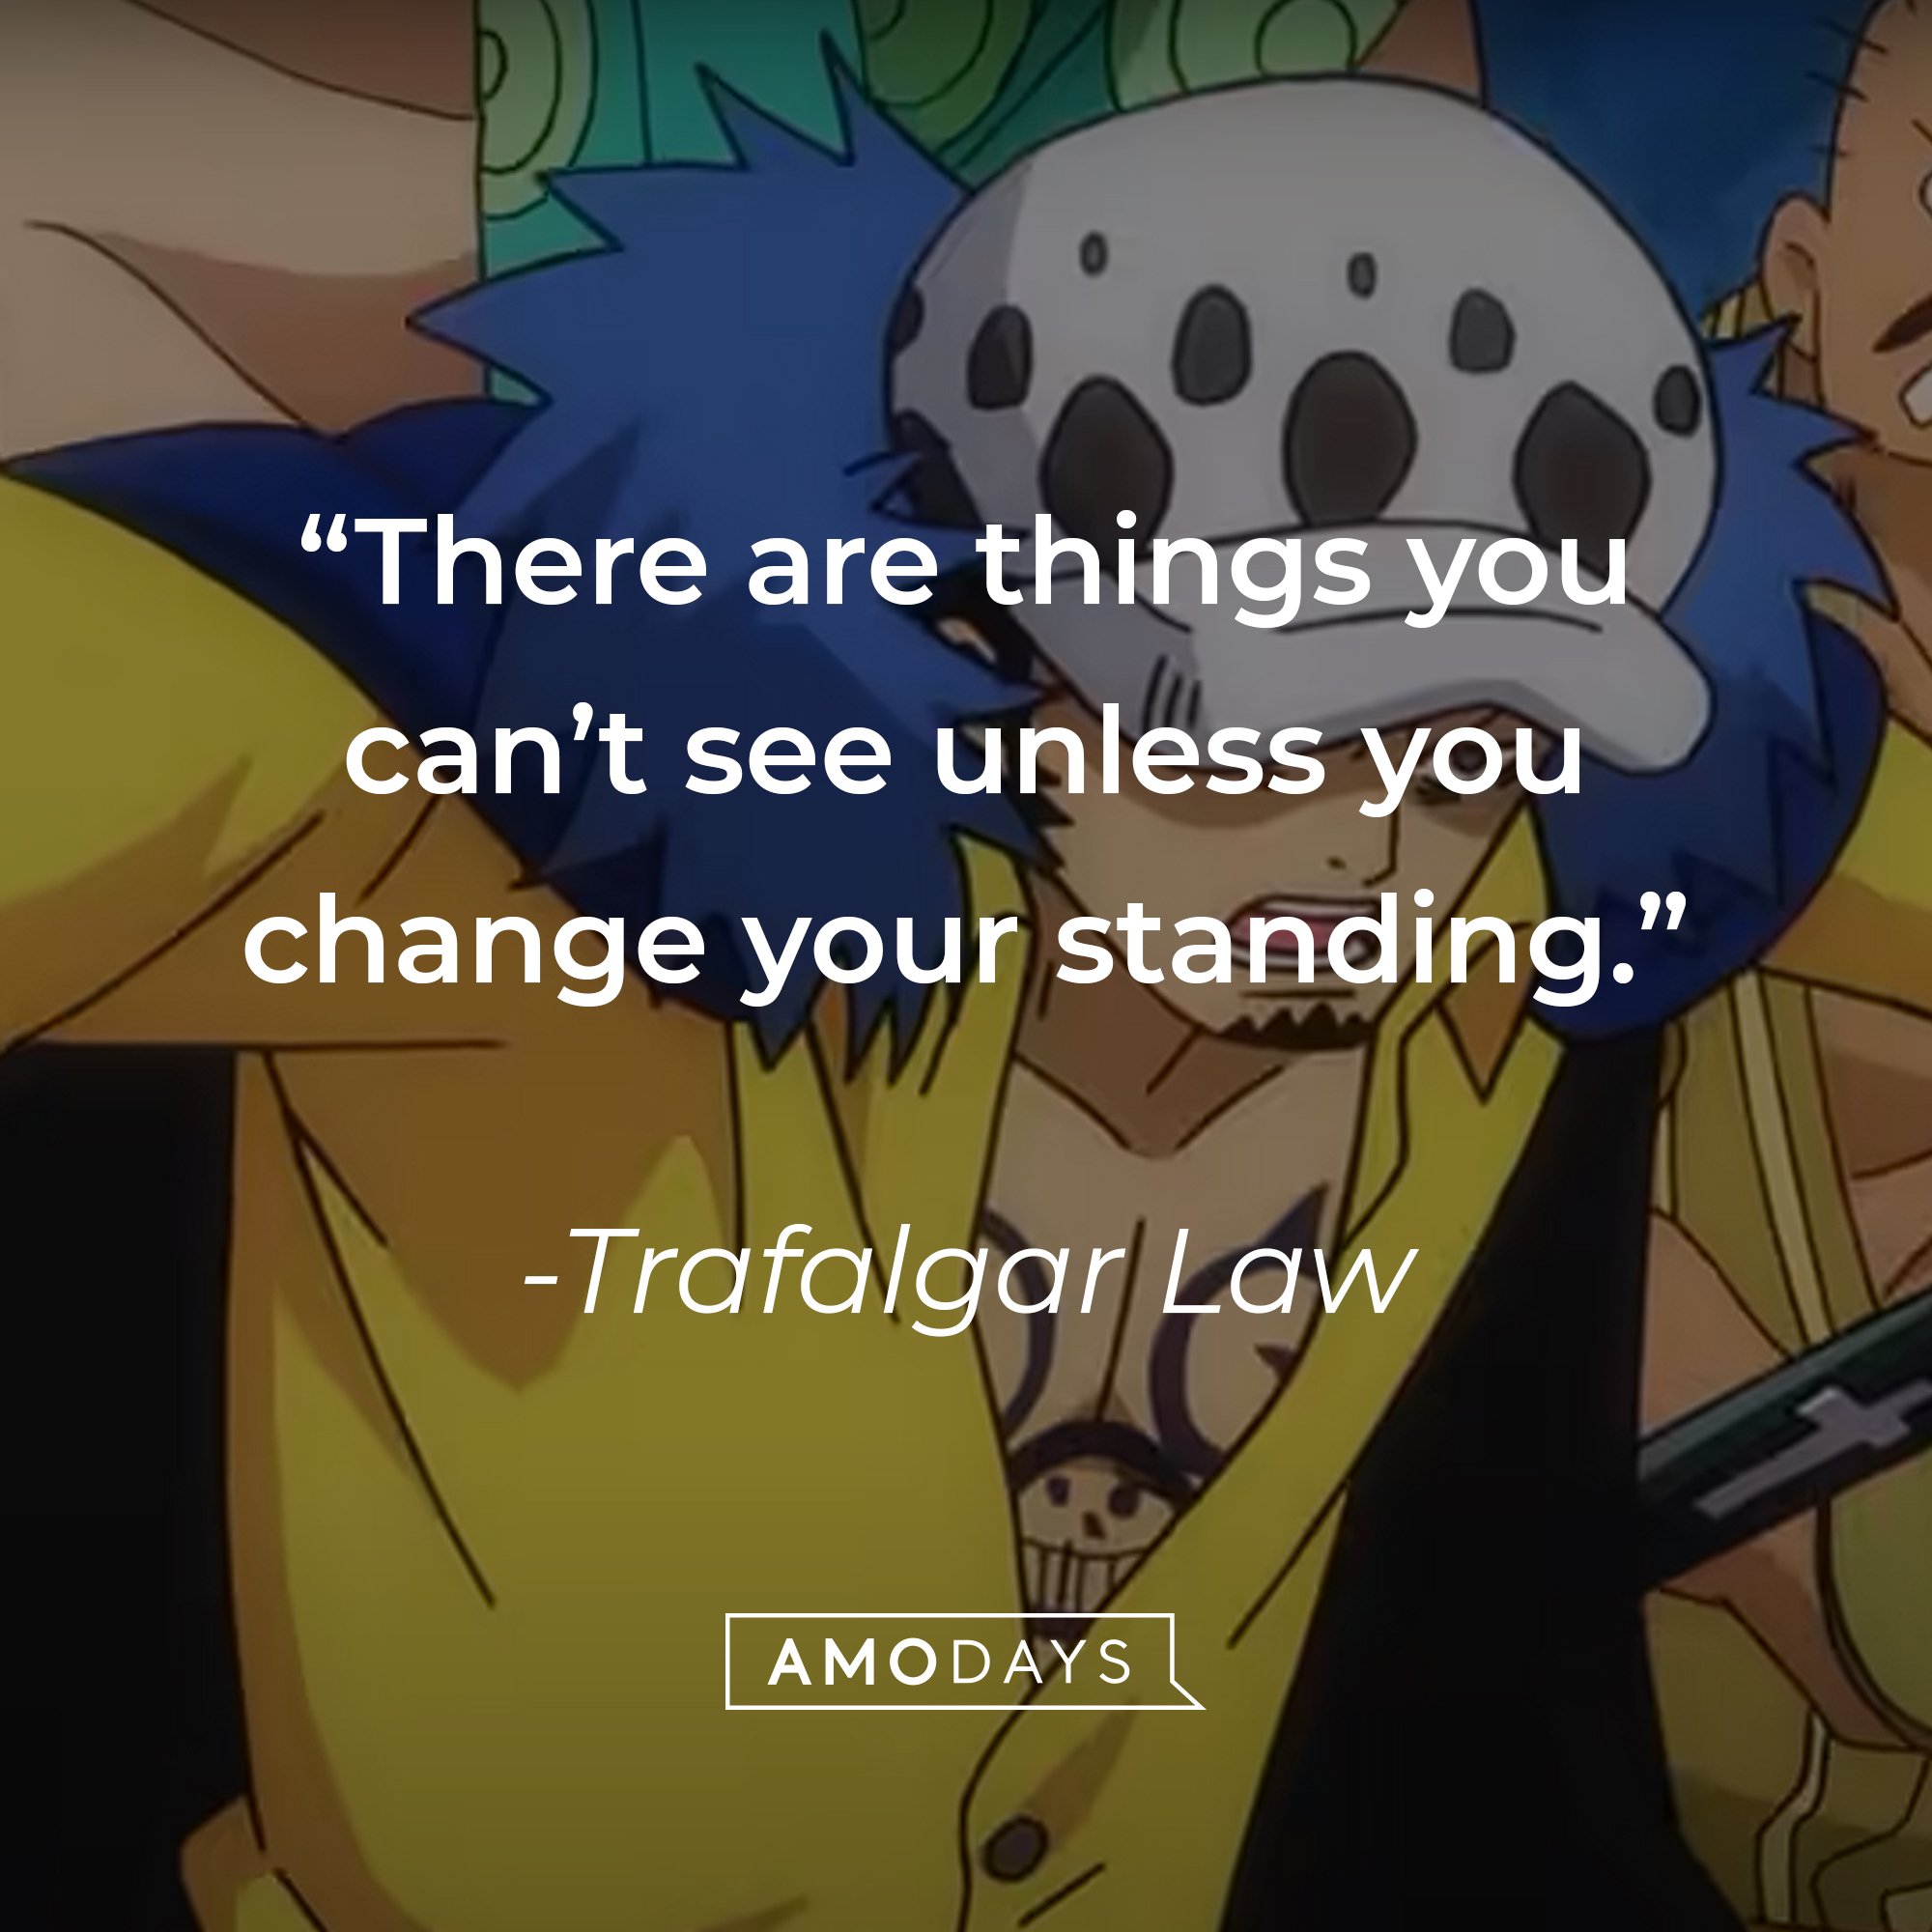 Trafalgar Law’s quote: "There are things you can’t see unless you change your standing.” | Image: AmoDays